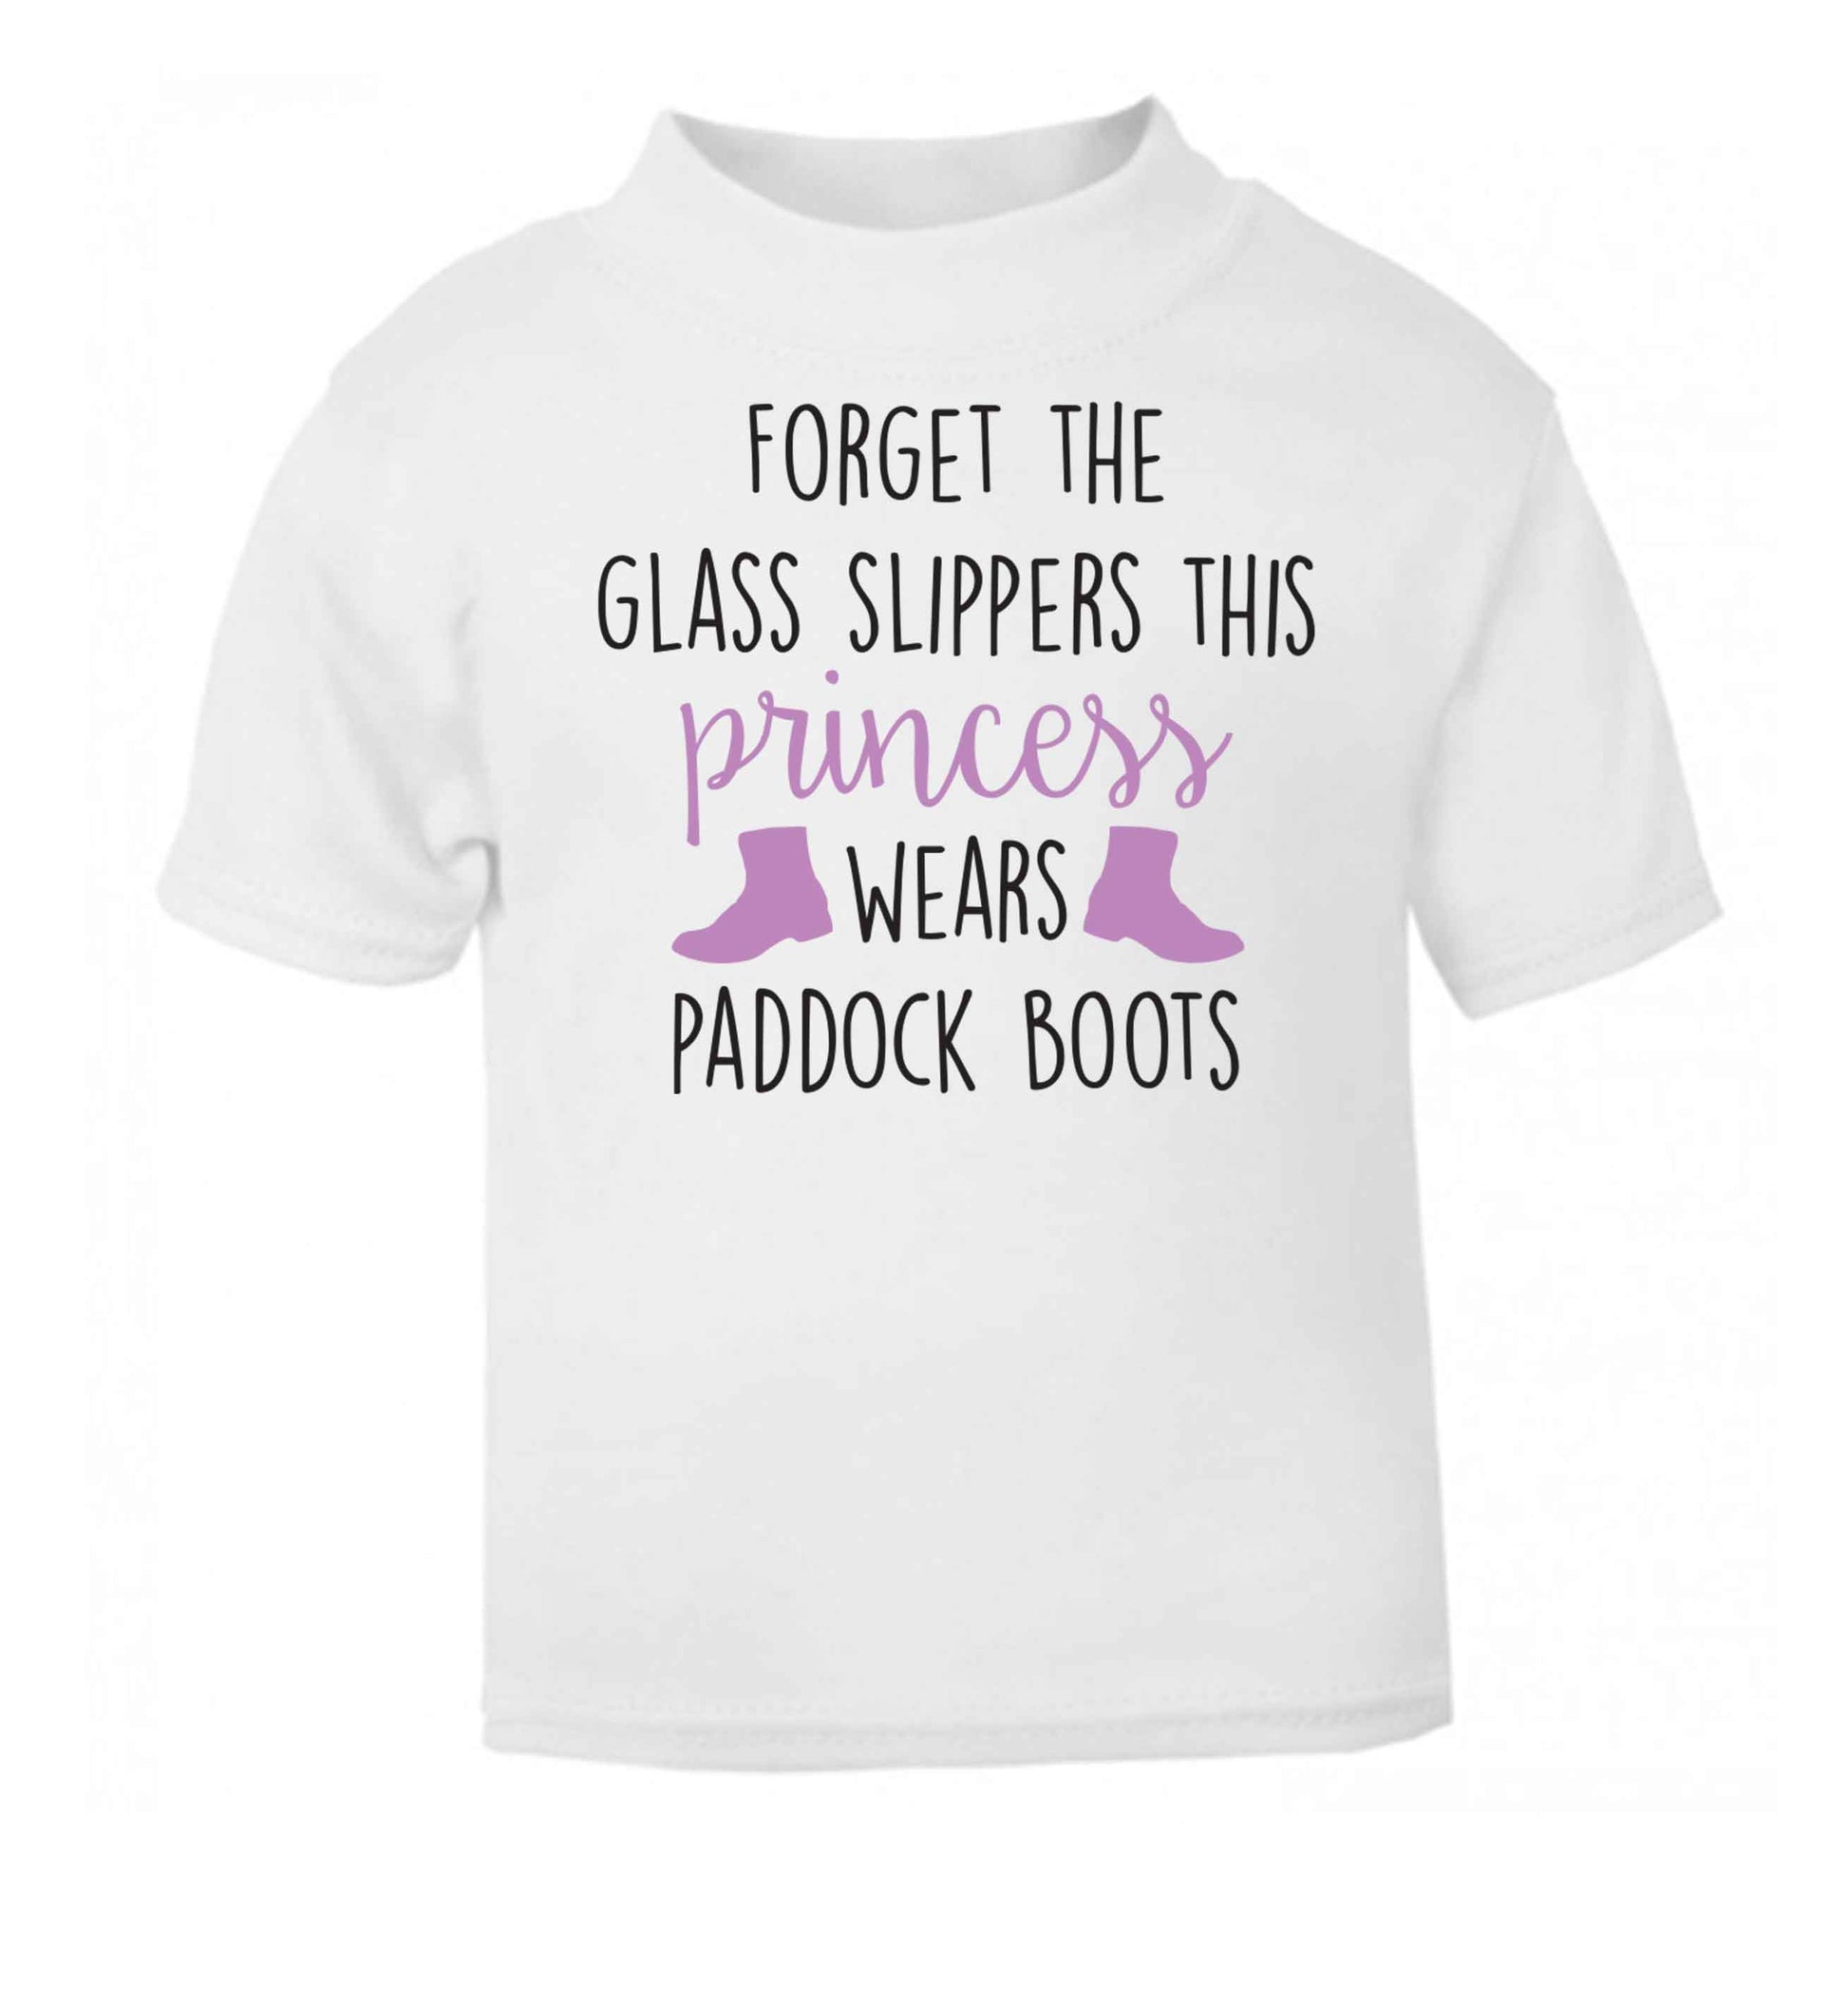 Forget the glass slippers this princess wears paddock boots white baby toddler Tshirt 2 Years